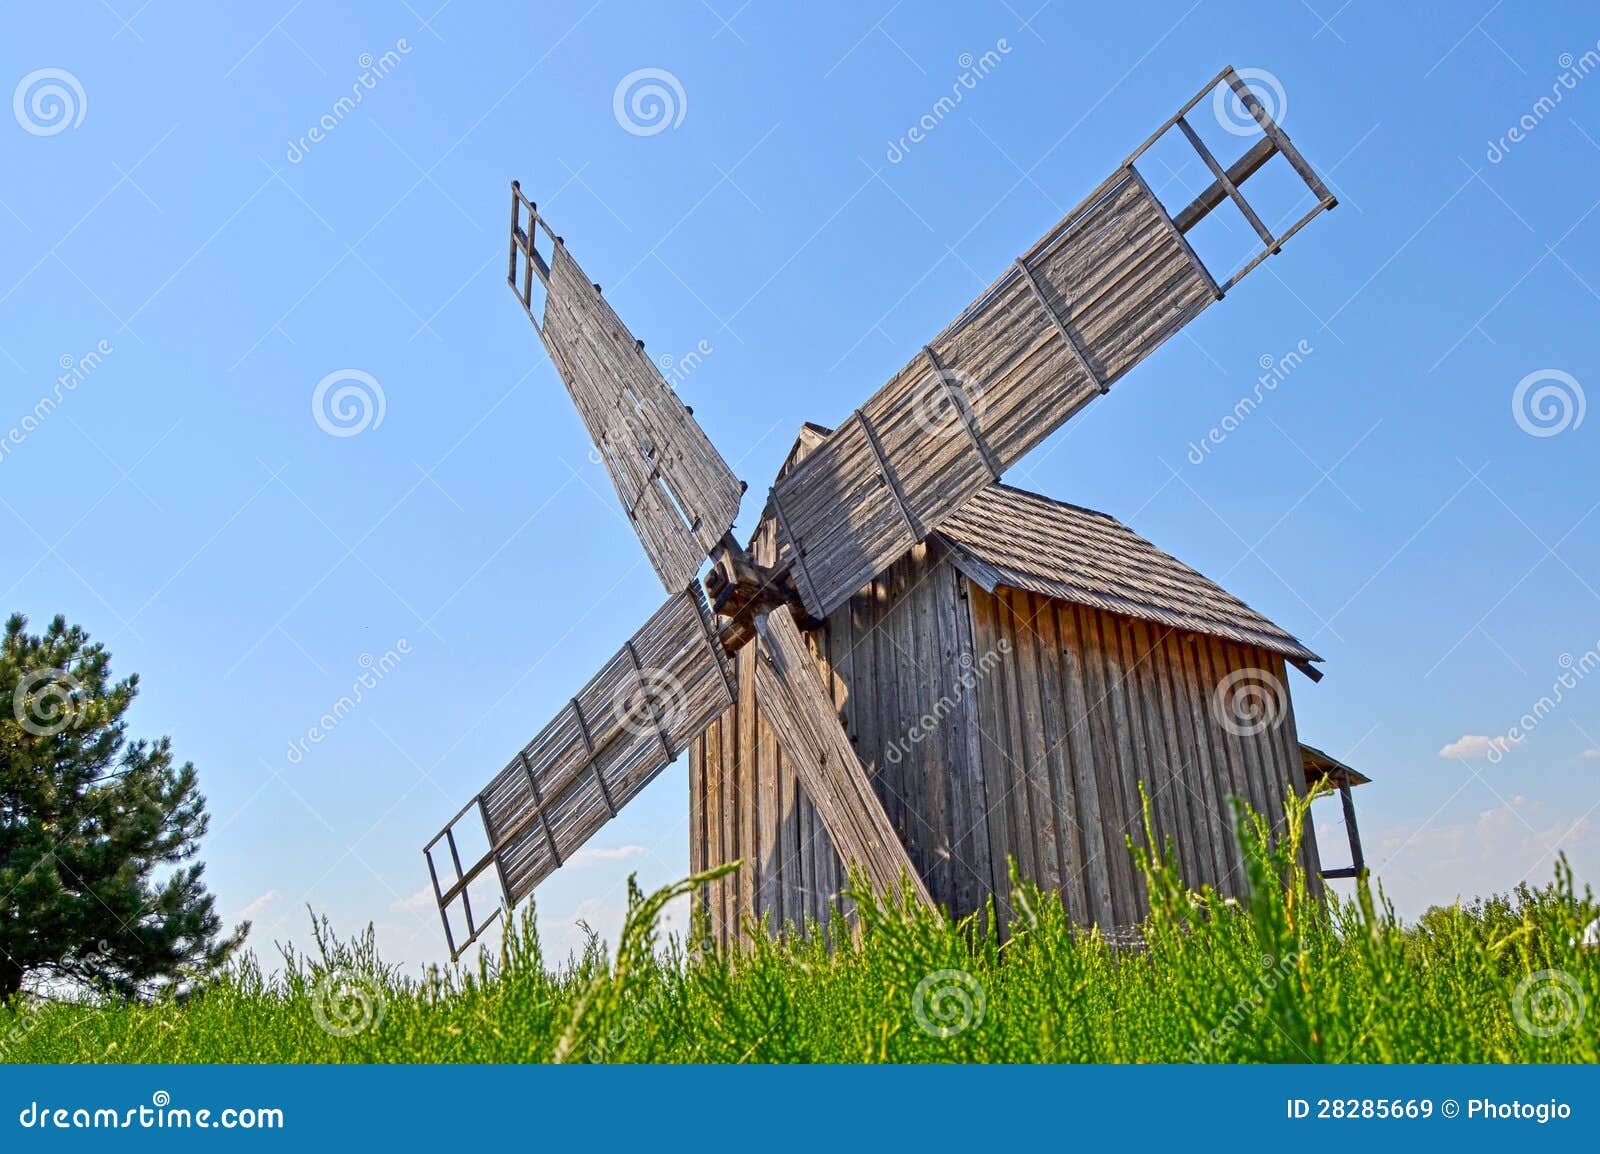 Old Windmill Royalty Free Stock Images - Image: 28285669